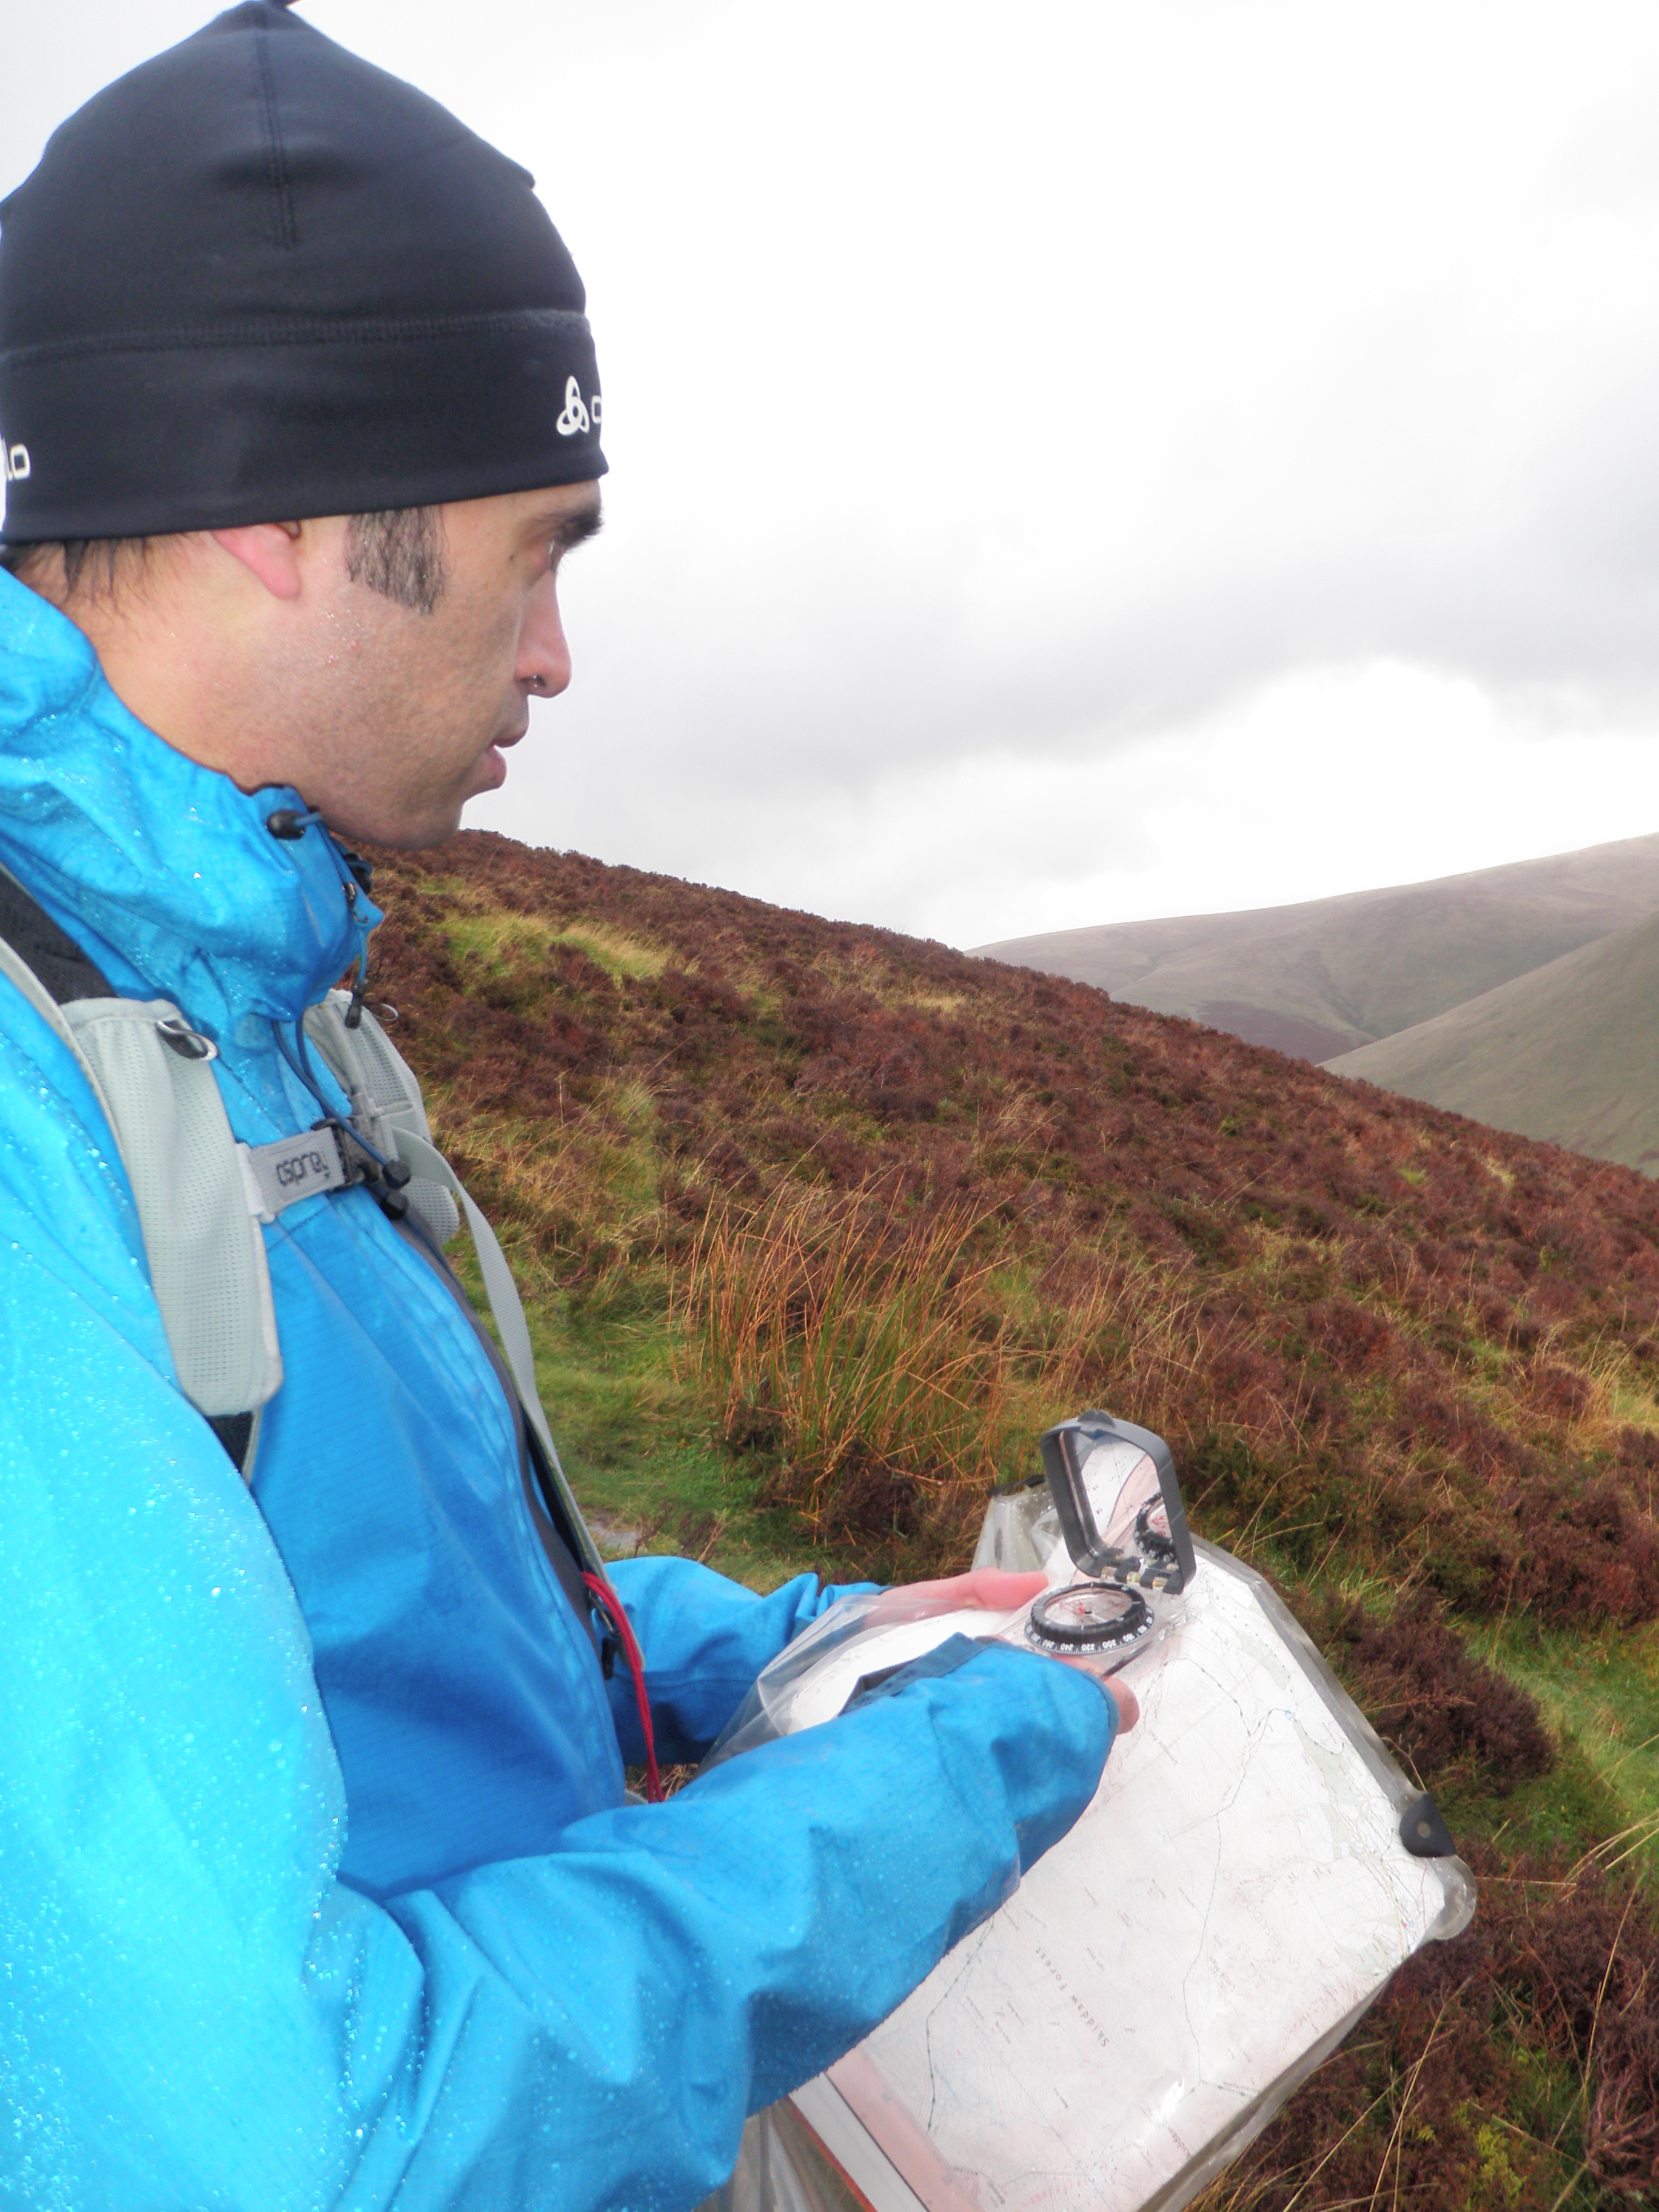 Imran is setting a bearing on a Navigation Course